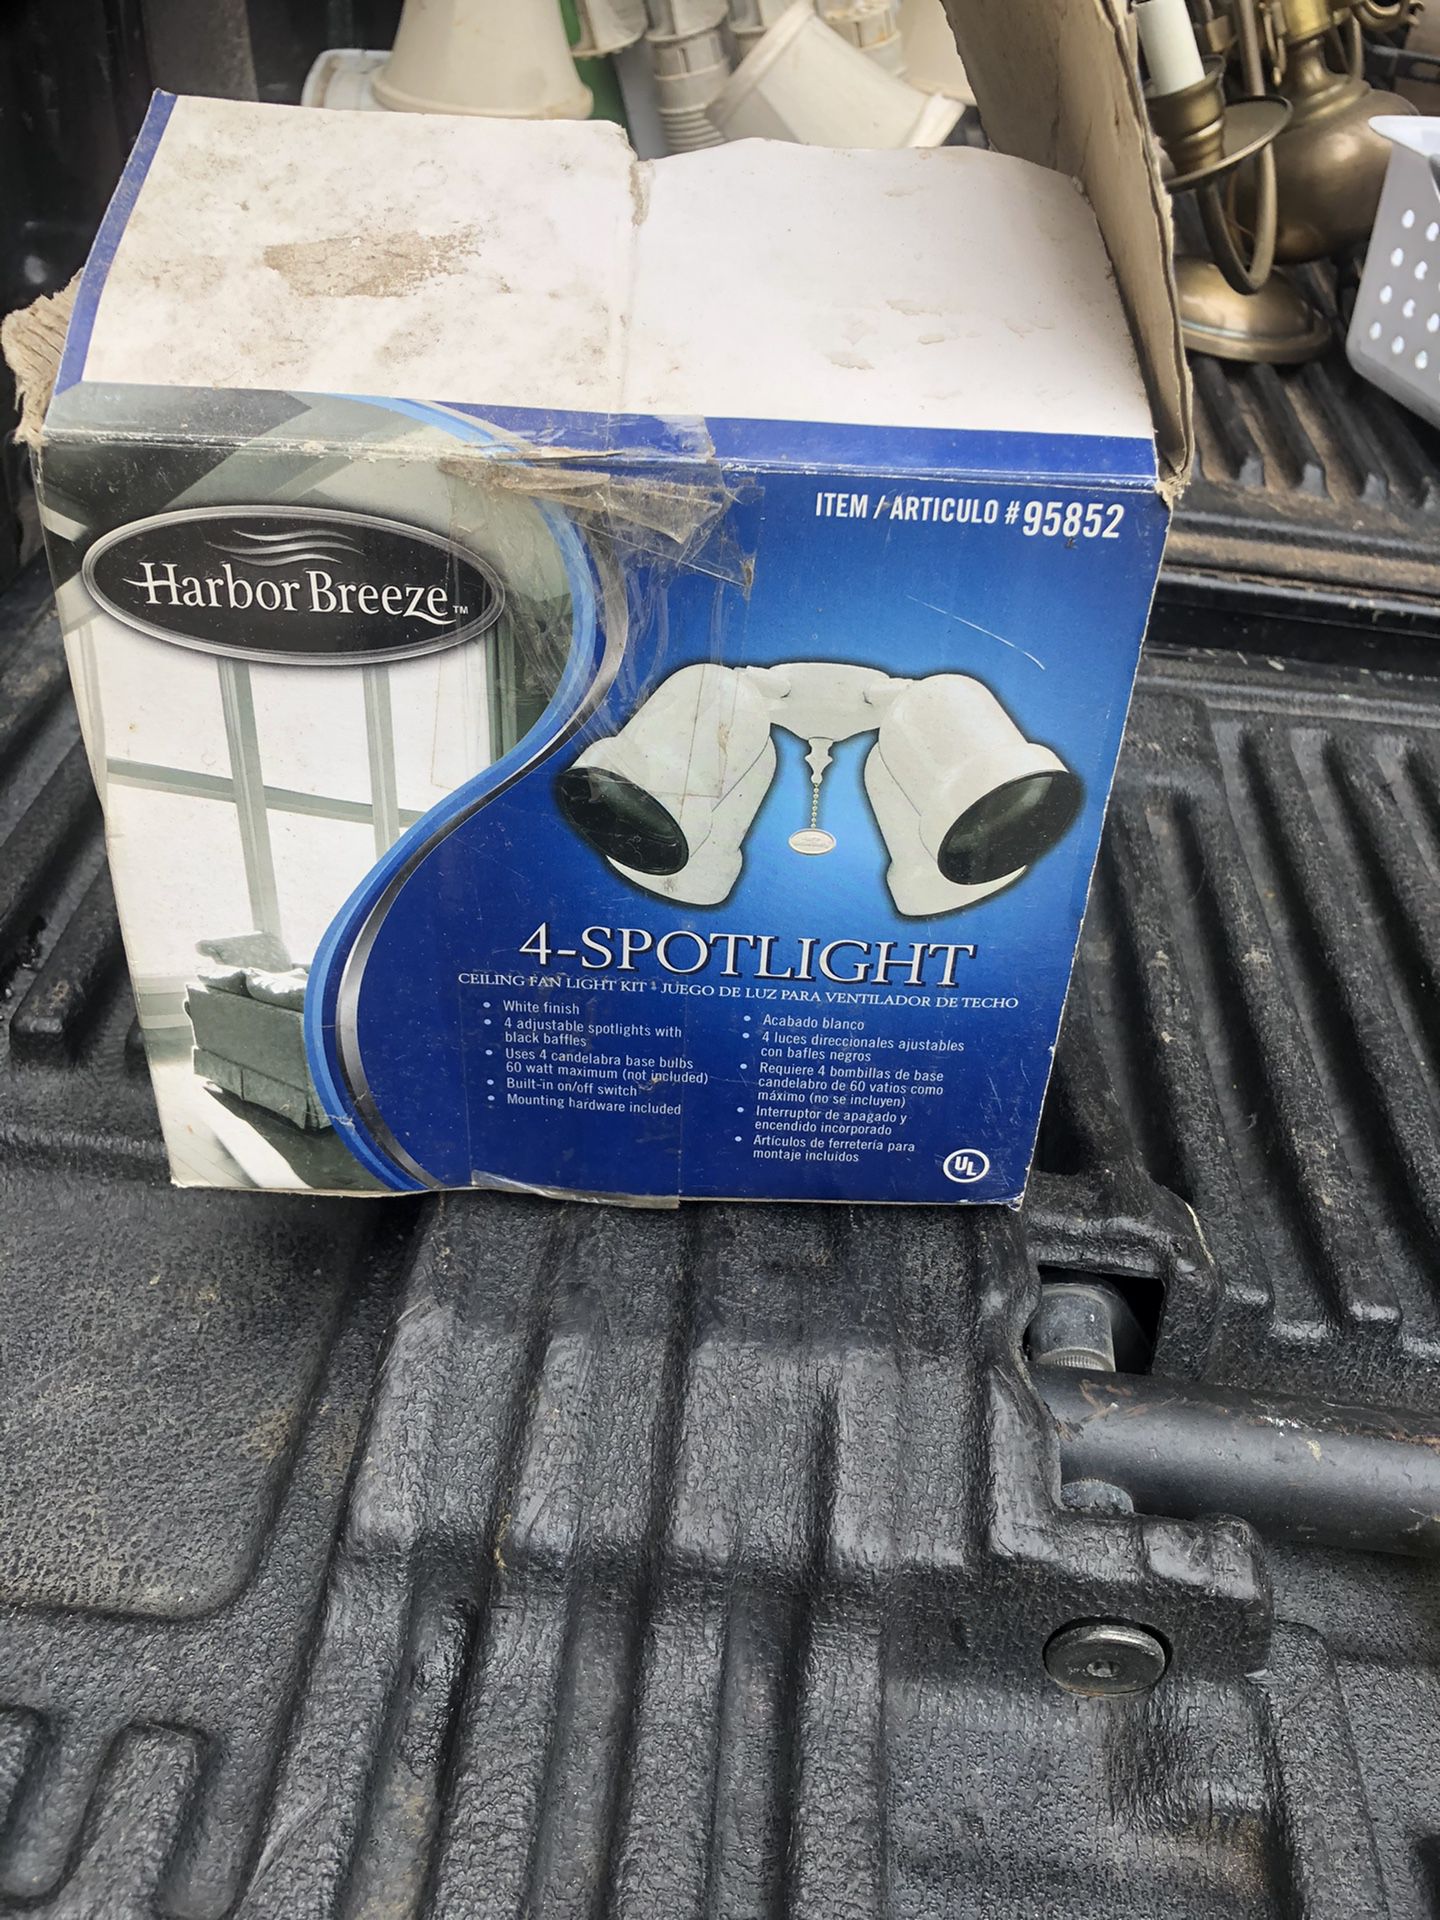 Free new lights in box.